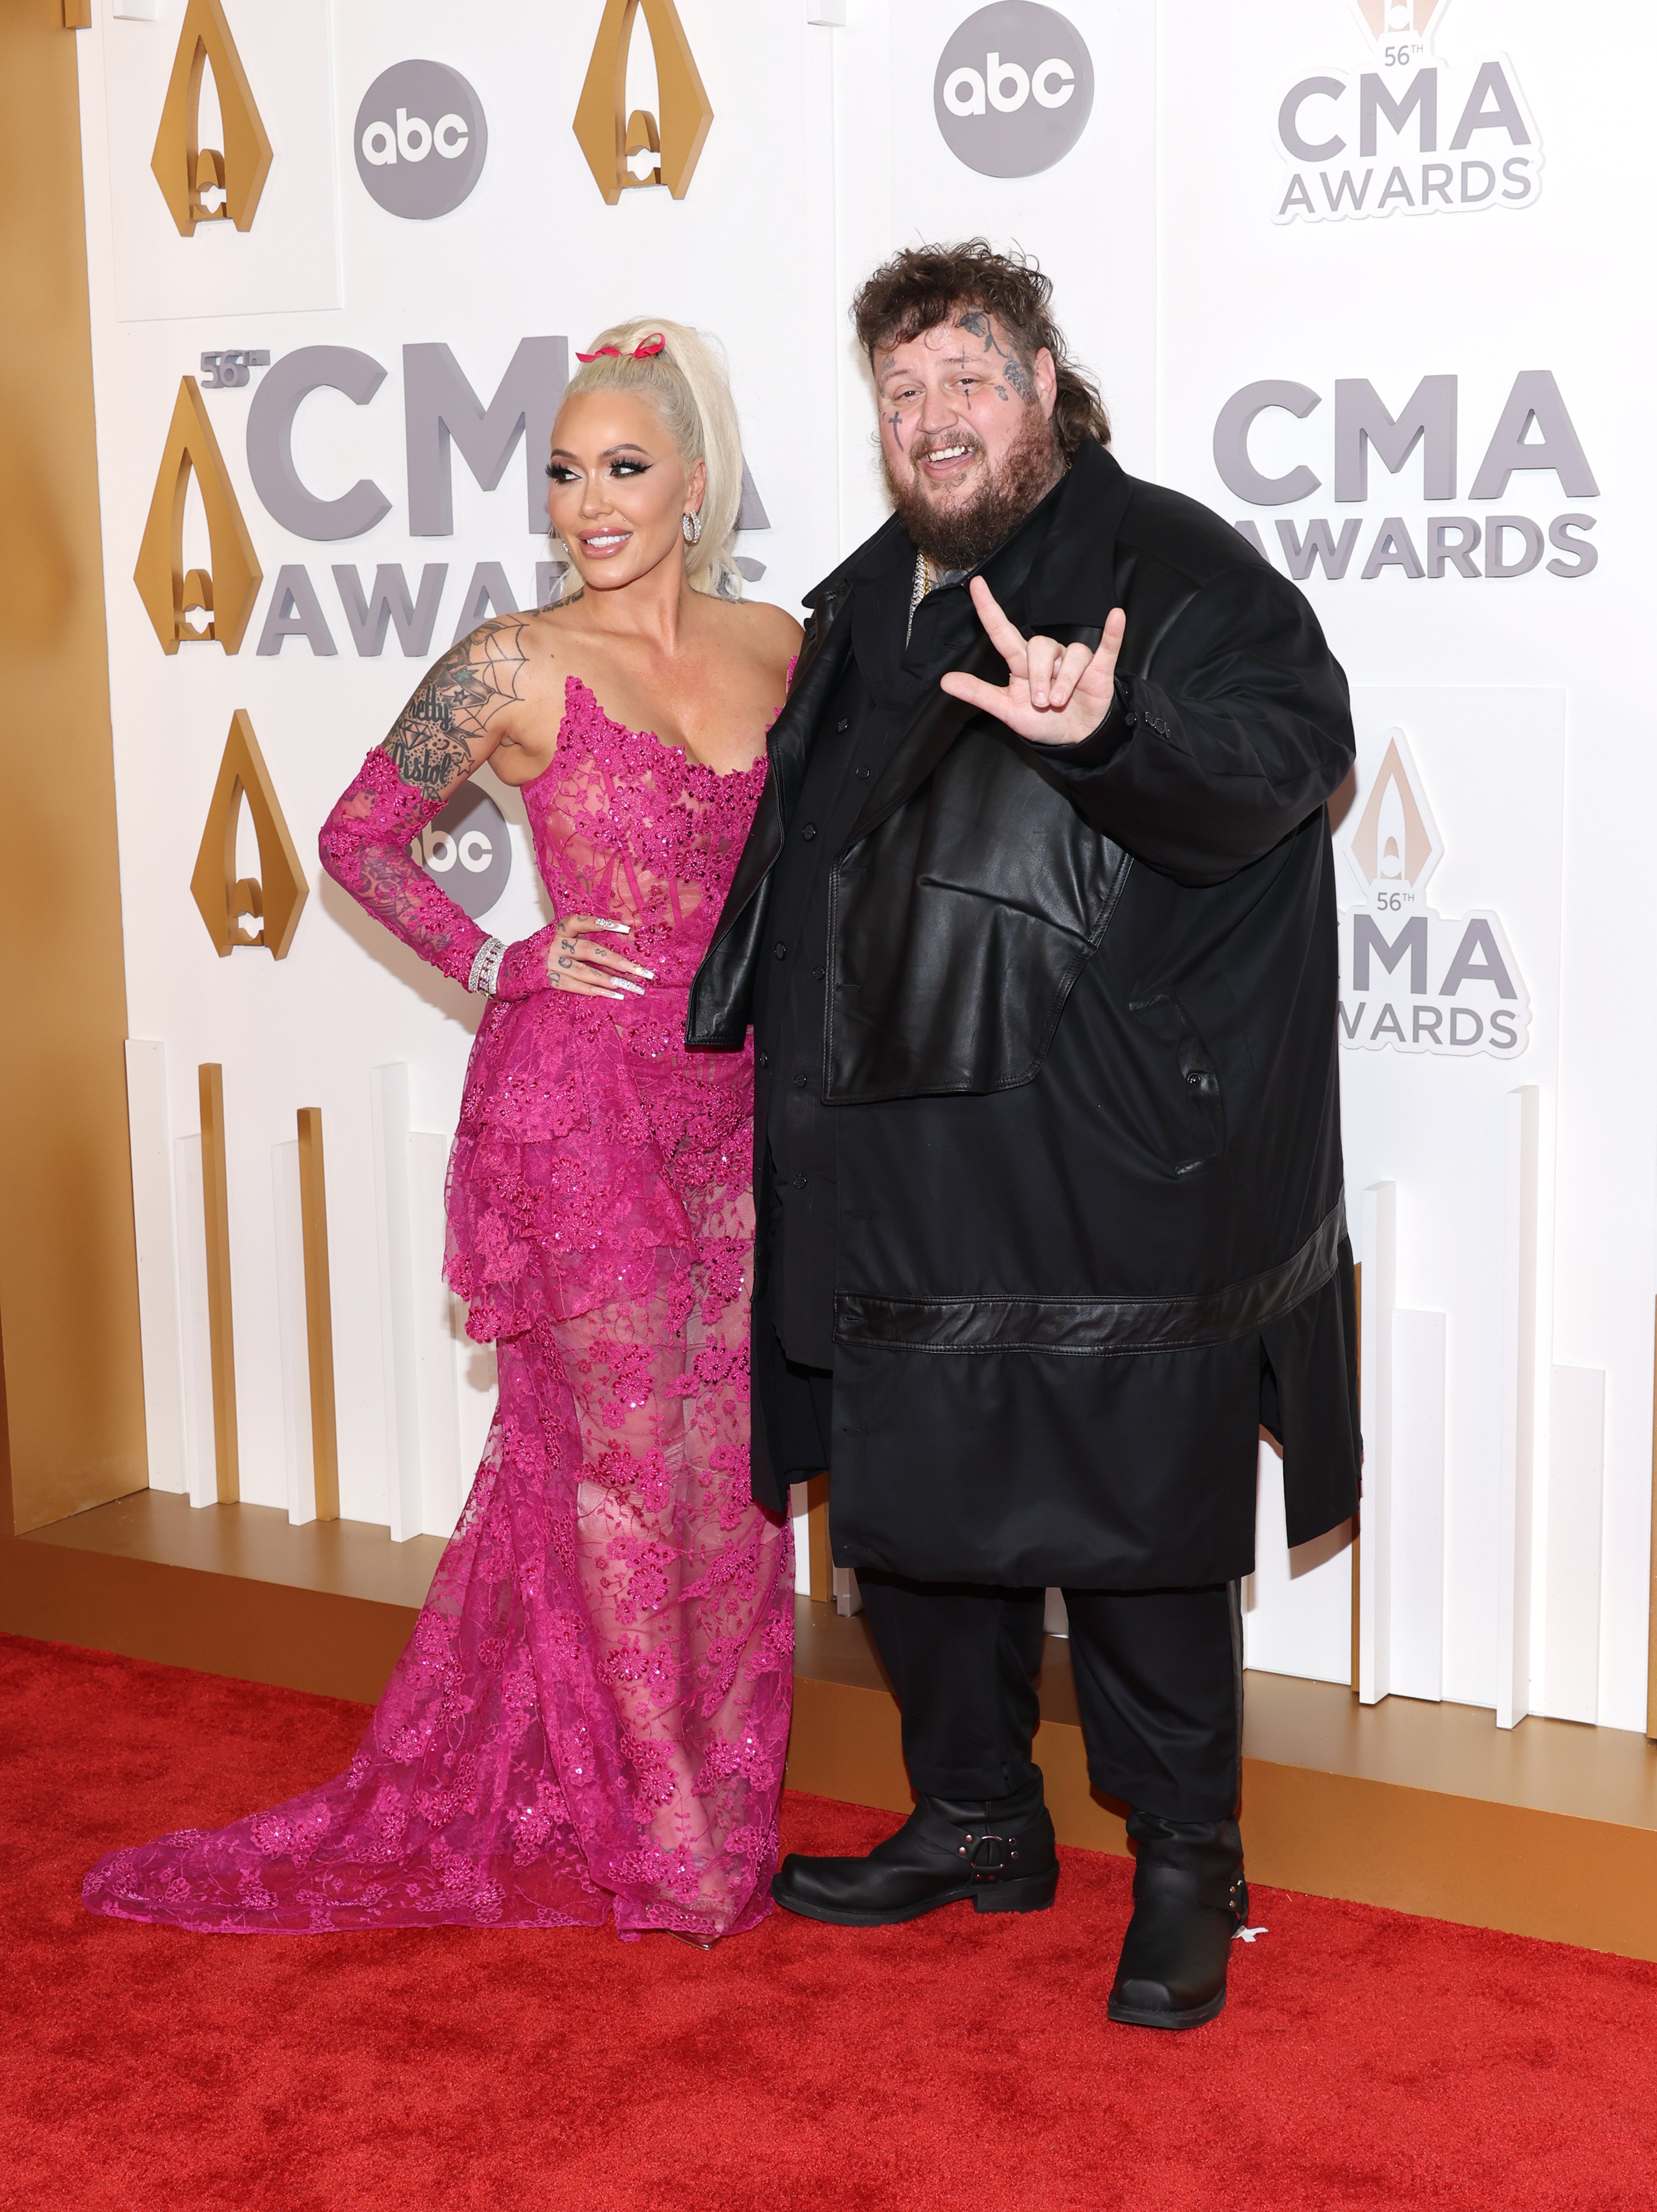 Bunnie Xo and Jelly Roll attend The 56th Annual CMA Awards at Bridgestone Arena on November 9, 2022, in Nashville, Tennessee. | Source: Getty Images